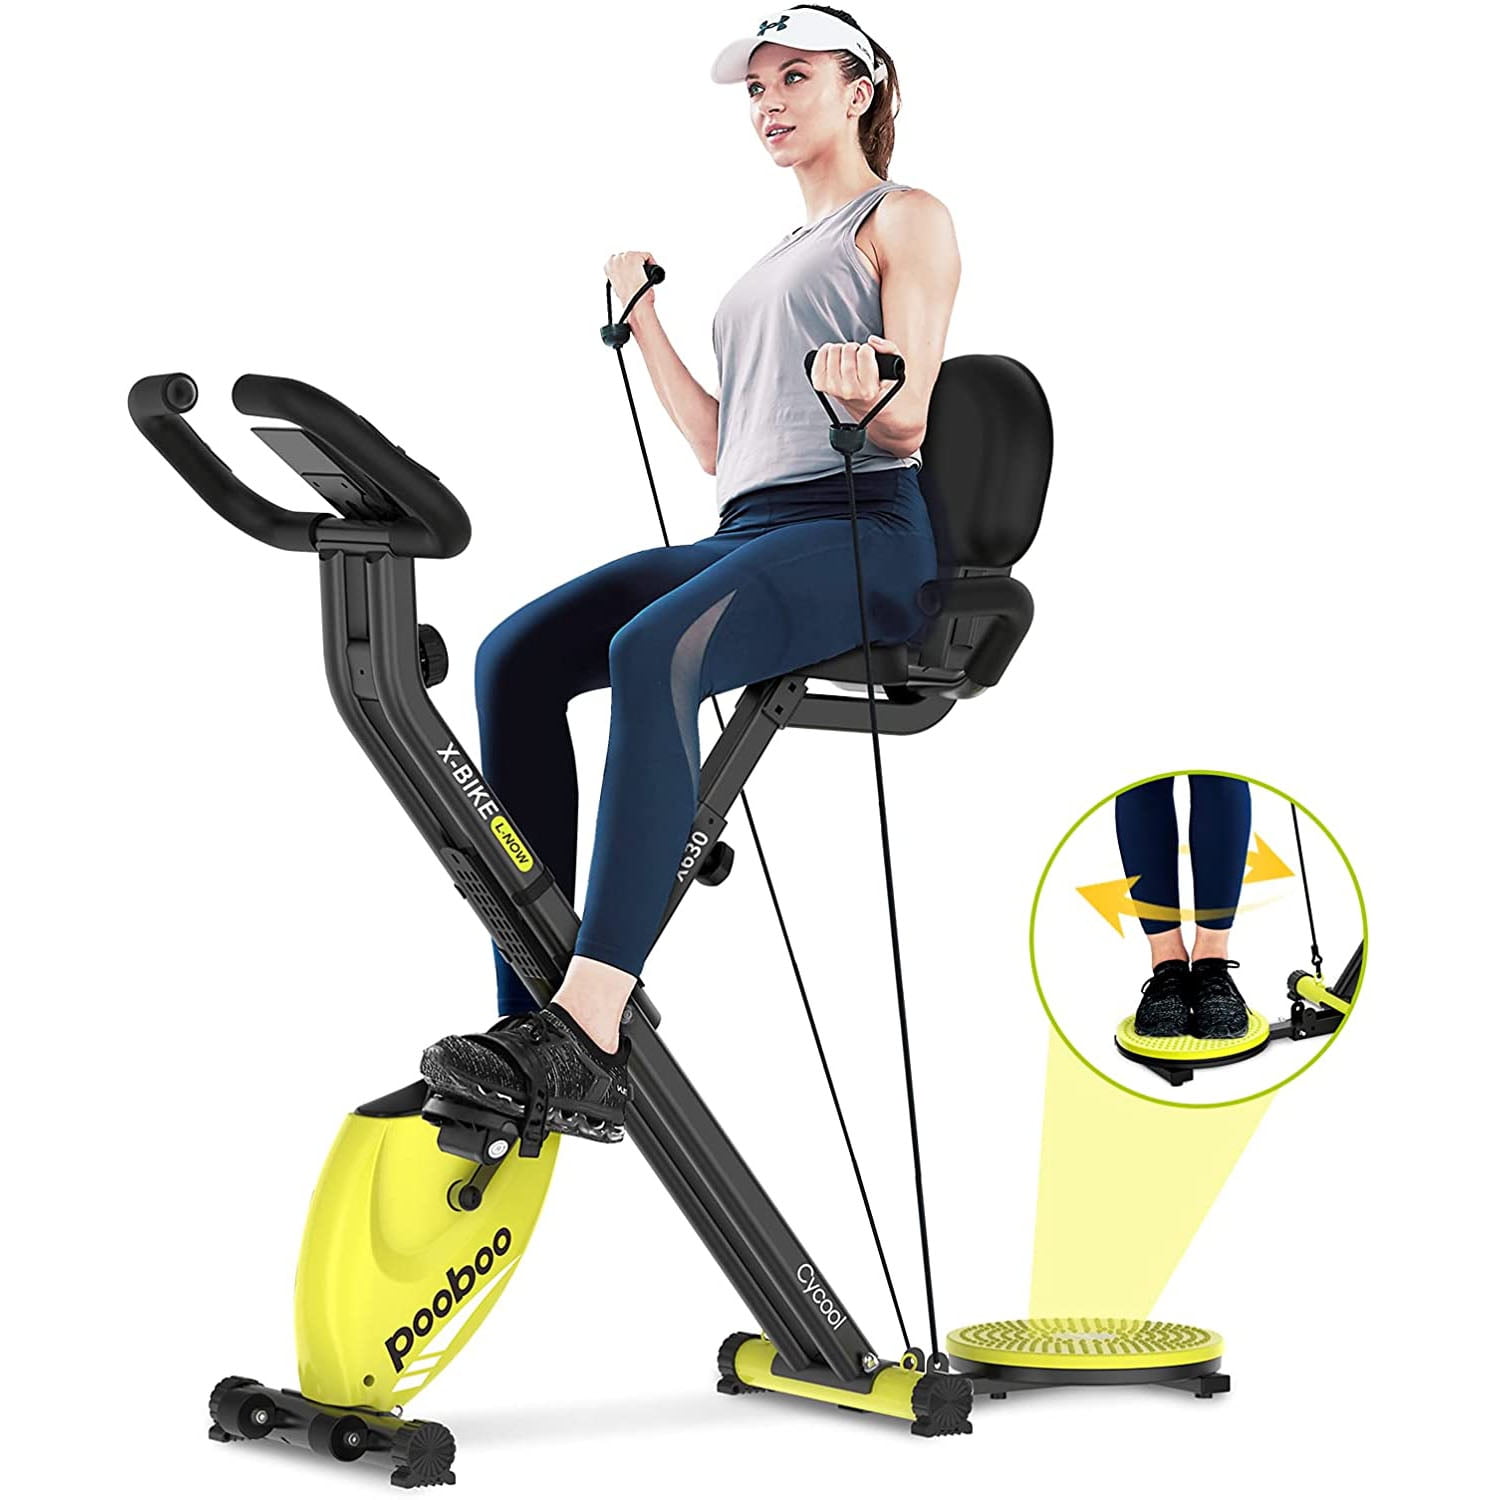 Magnetic Control All-Inclusive Dynamic Rotating Exercise Bike Sports Equipment Home Bicycle Equipment Smart Silent Bicycle Indoor Fitness 